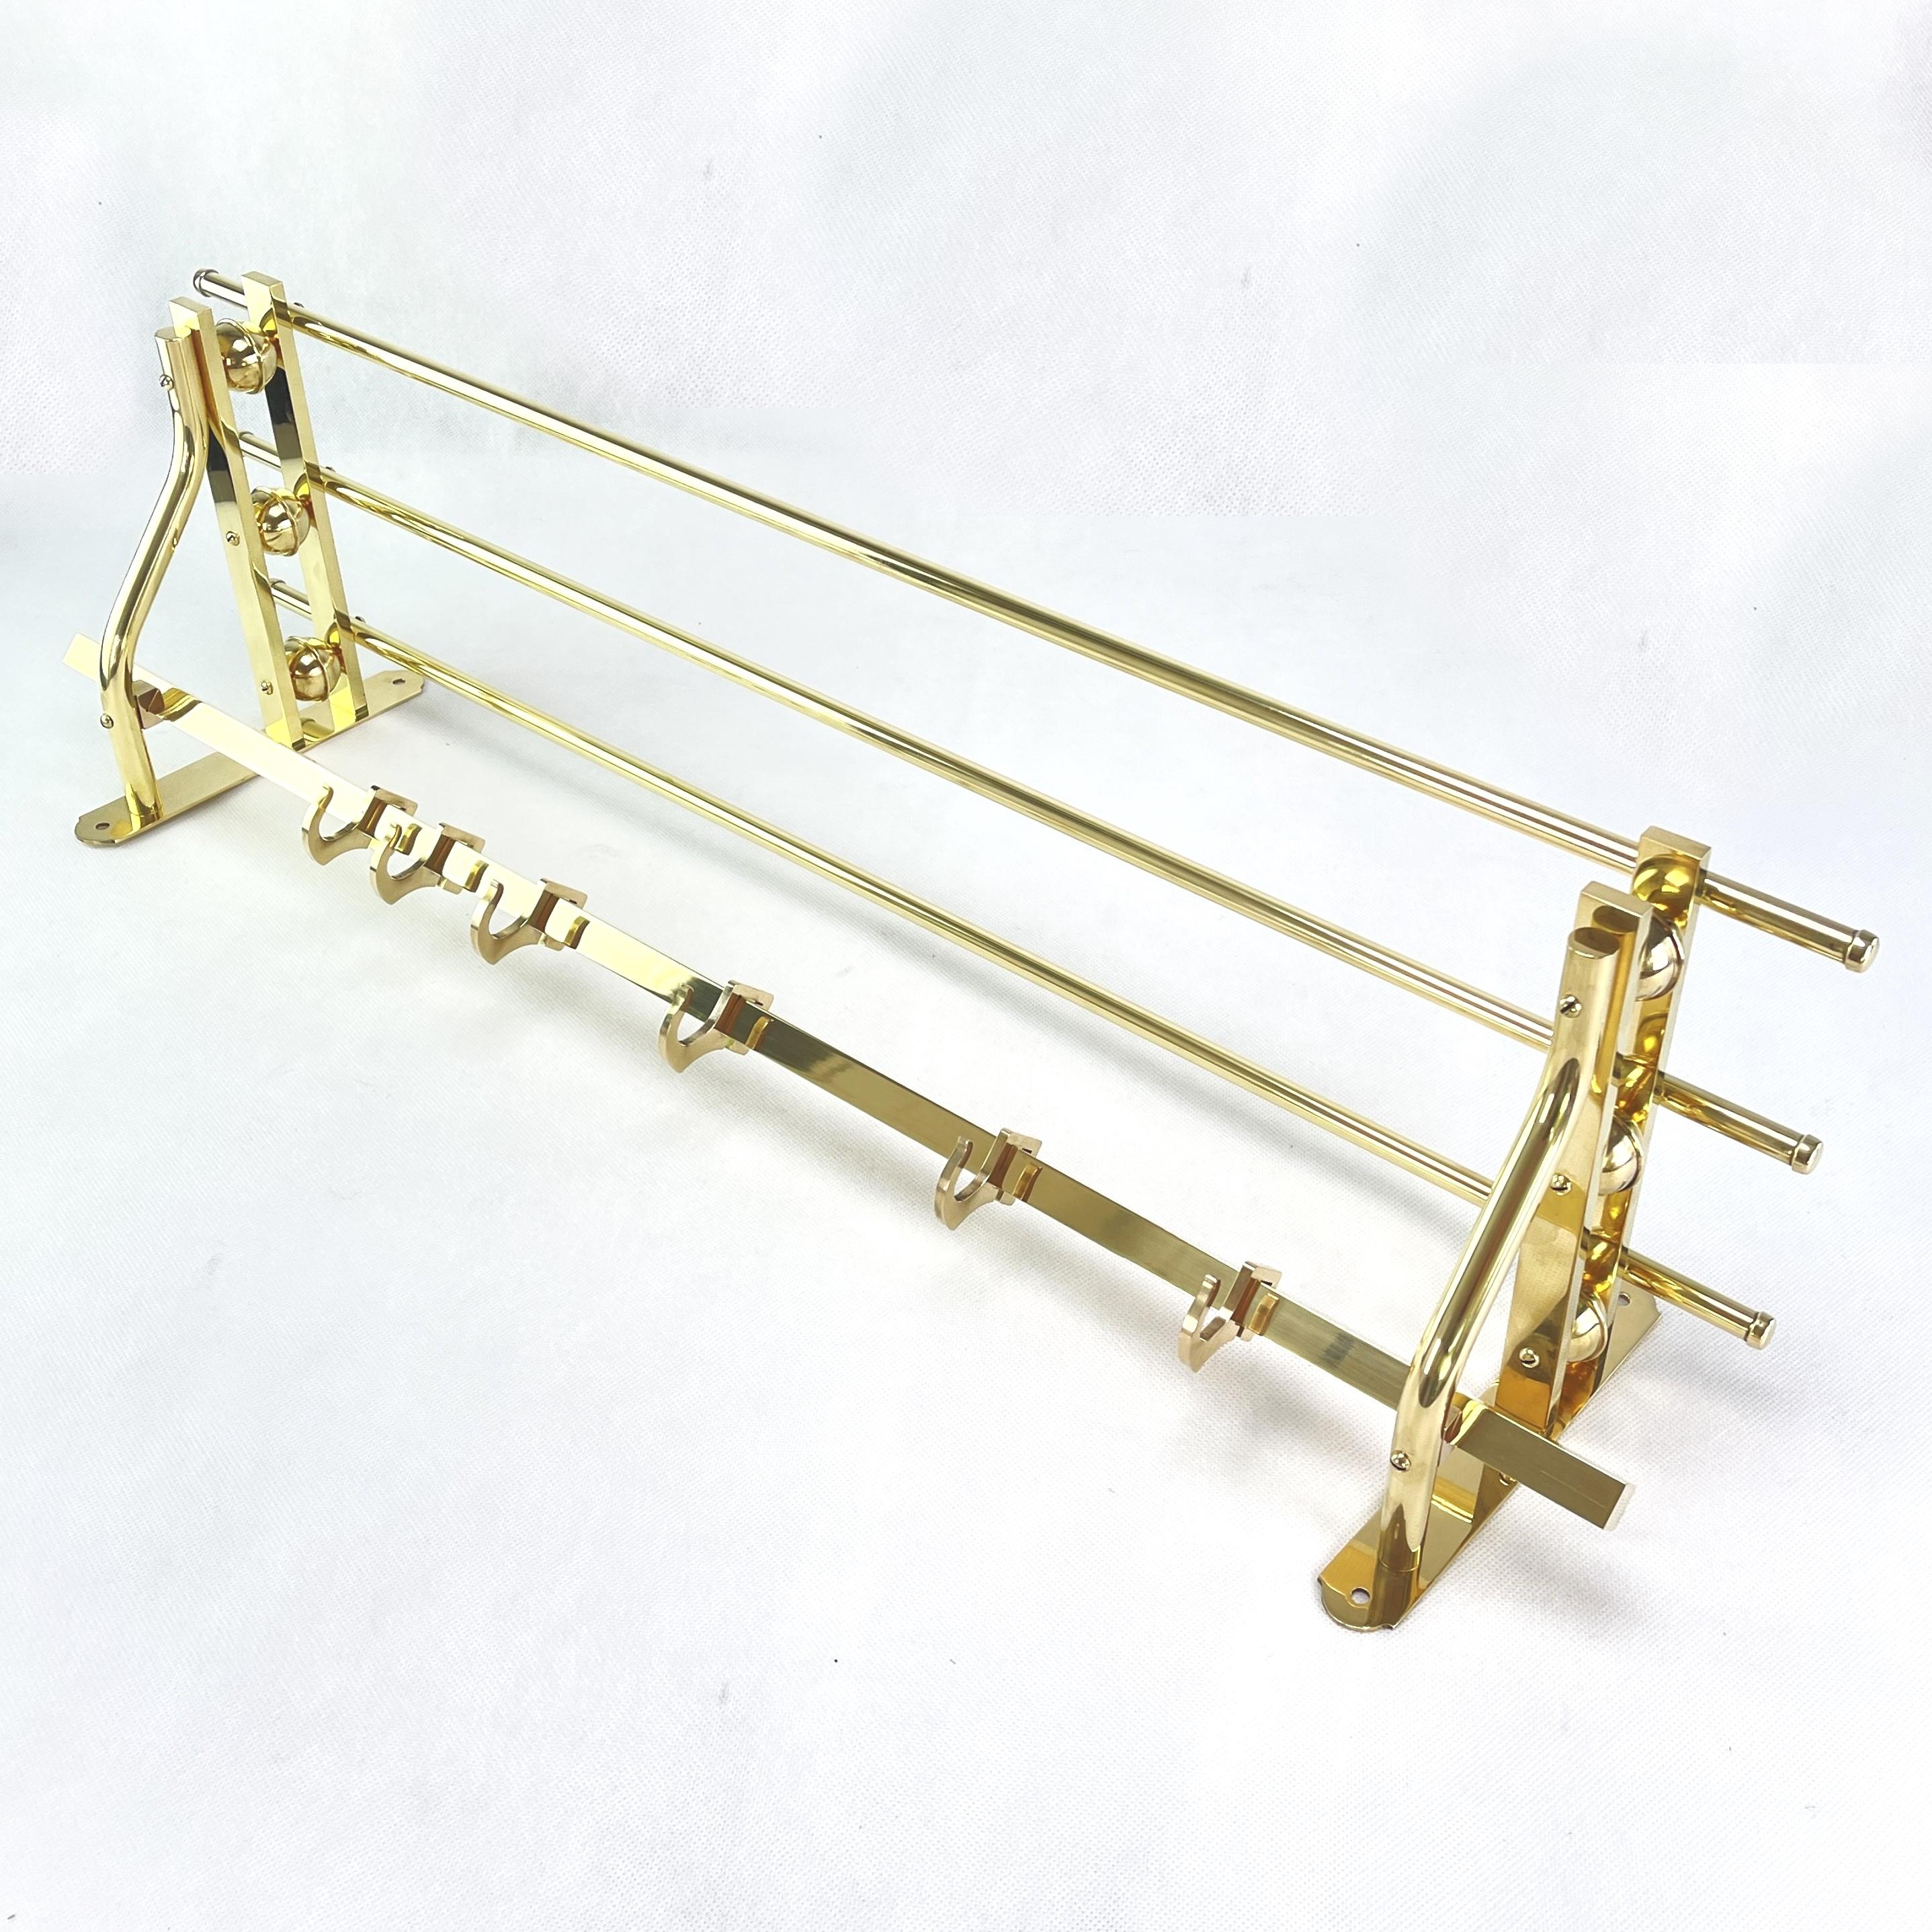 This beautiful wall coat rack from the 1930s is in the streamline modern art deco style. This style emphasized curvy streamlined shapes.

This coat rack has 6 movable hooks to hold your clothes. 

Beautiful timeless antique piece that will leave a